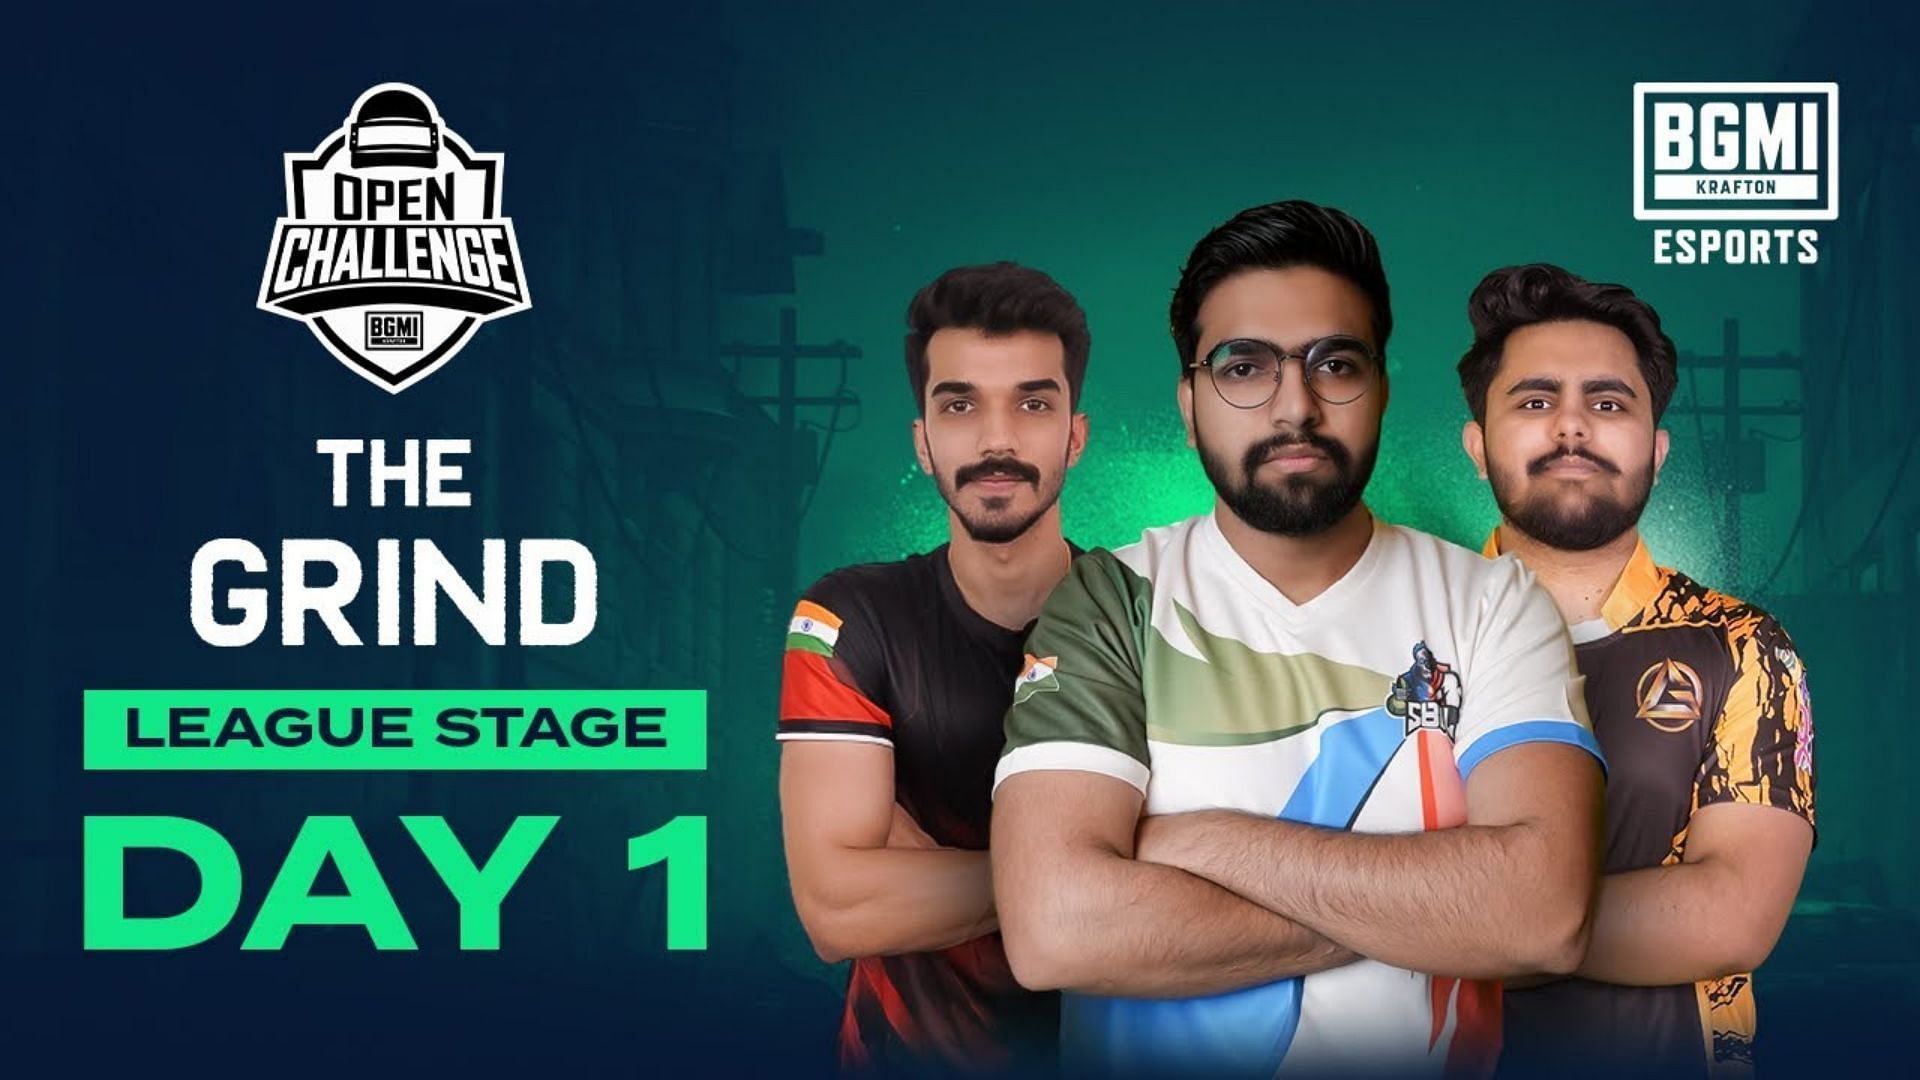 BMOC The Grind League Stage will take place from 7 April (Image via BGMI)